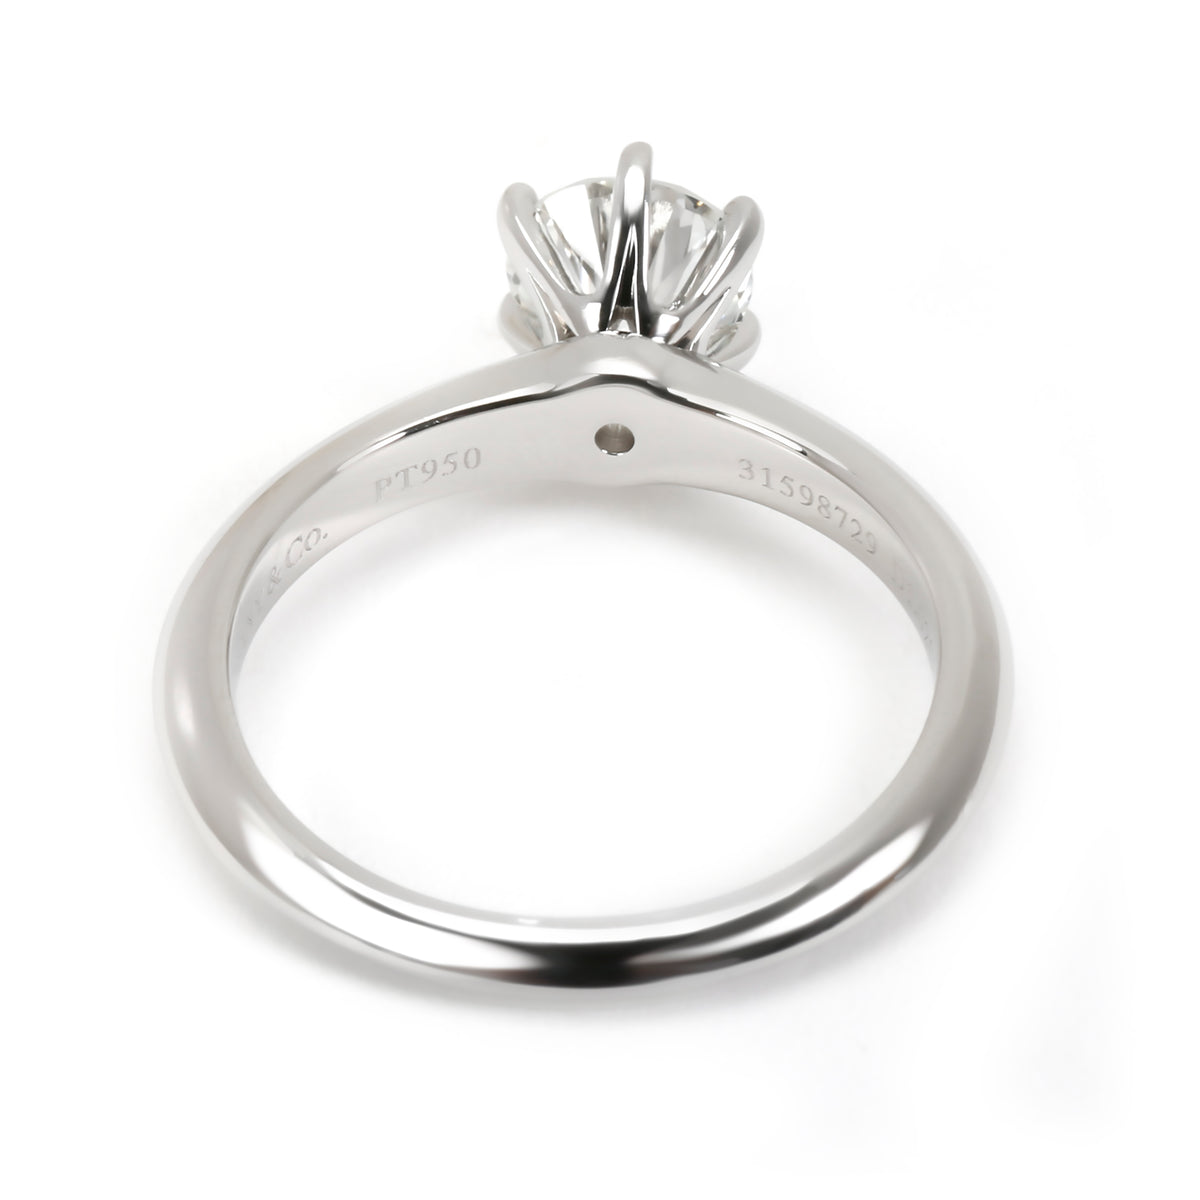 Tiffany & Co. Solitaire Diamond Engagement Ring in Platinum (1.02 ct H/VS1)